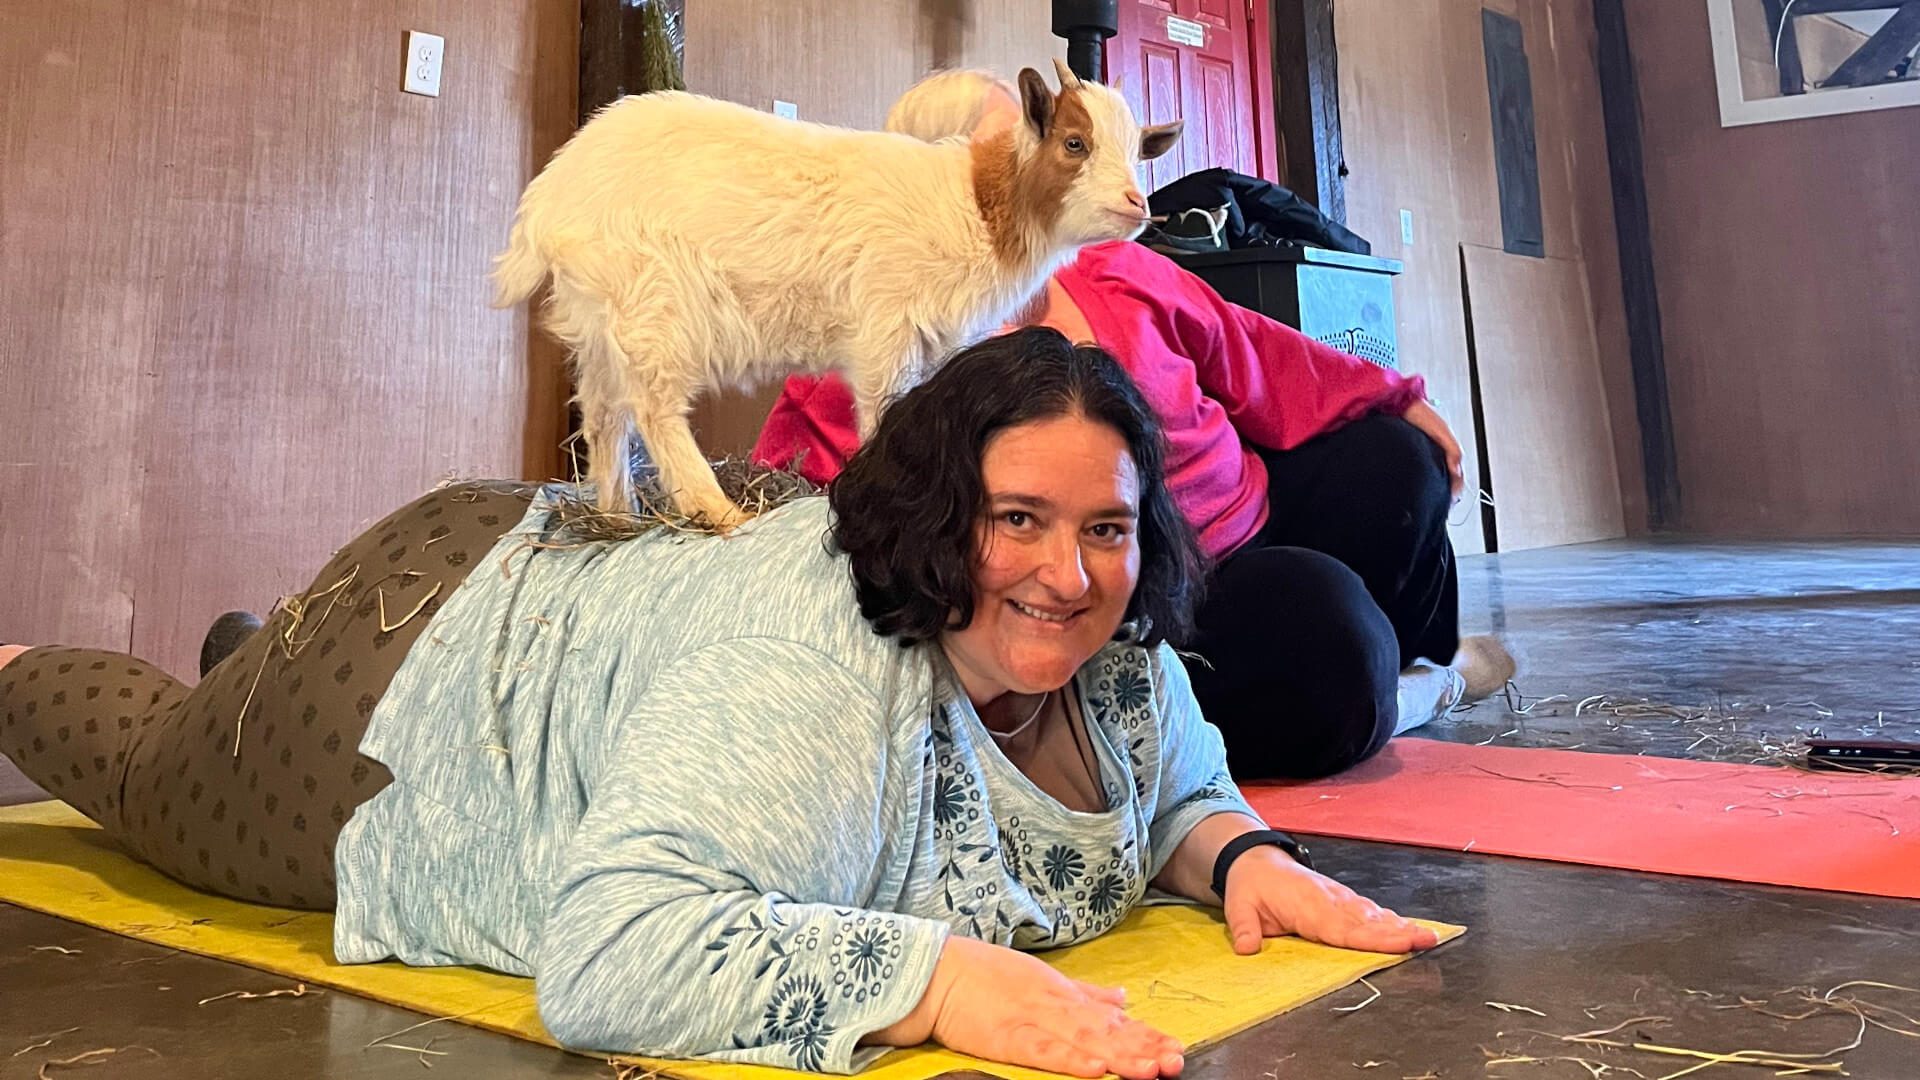 Downward dog yoga pose with small goat on top at indoor goat yoga session.